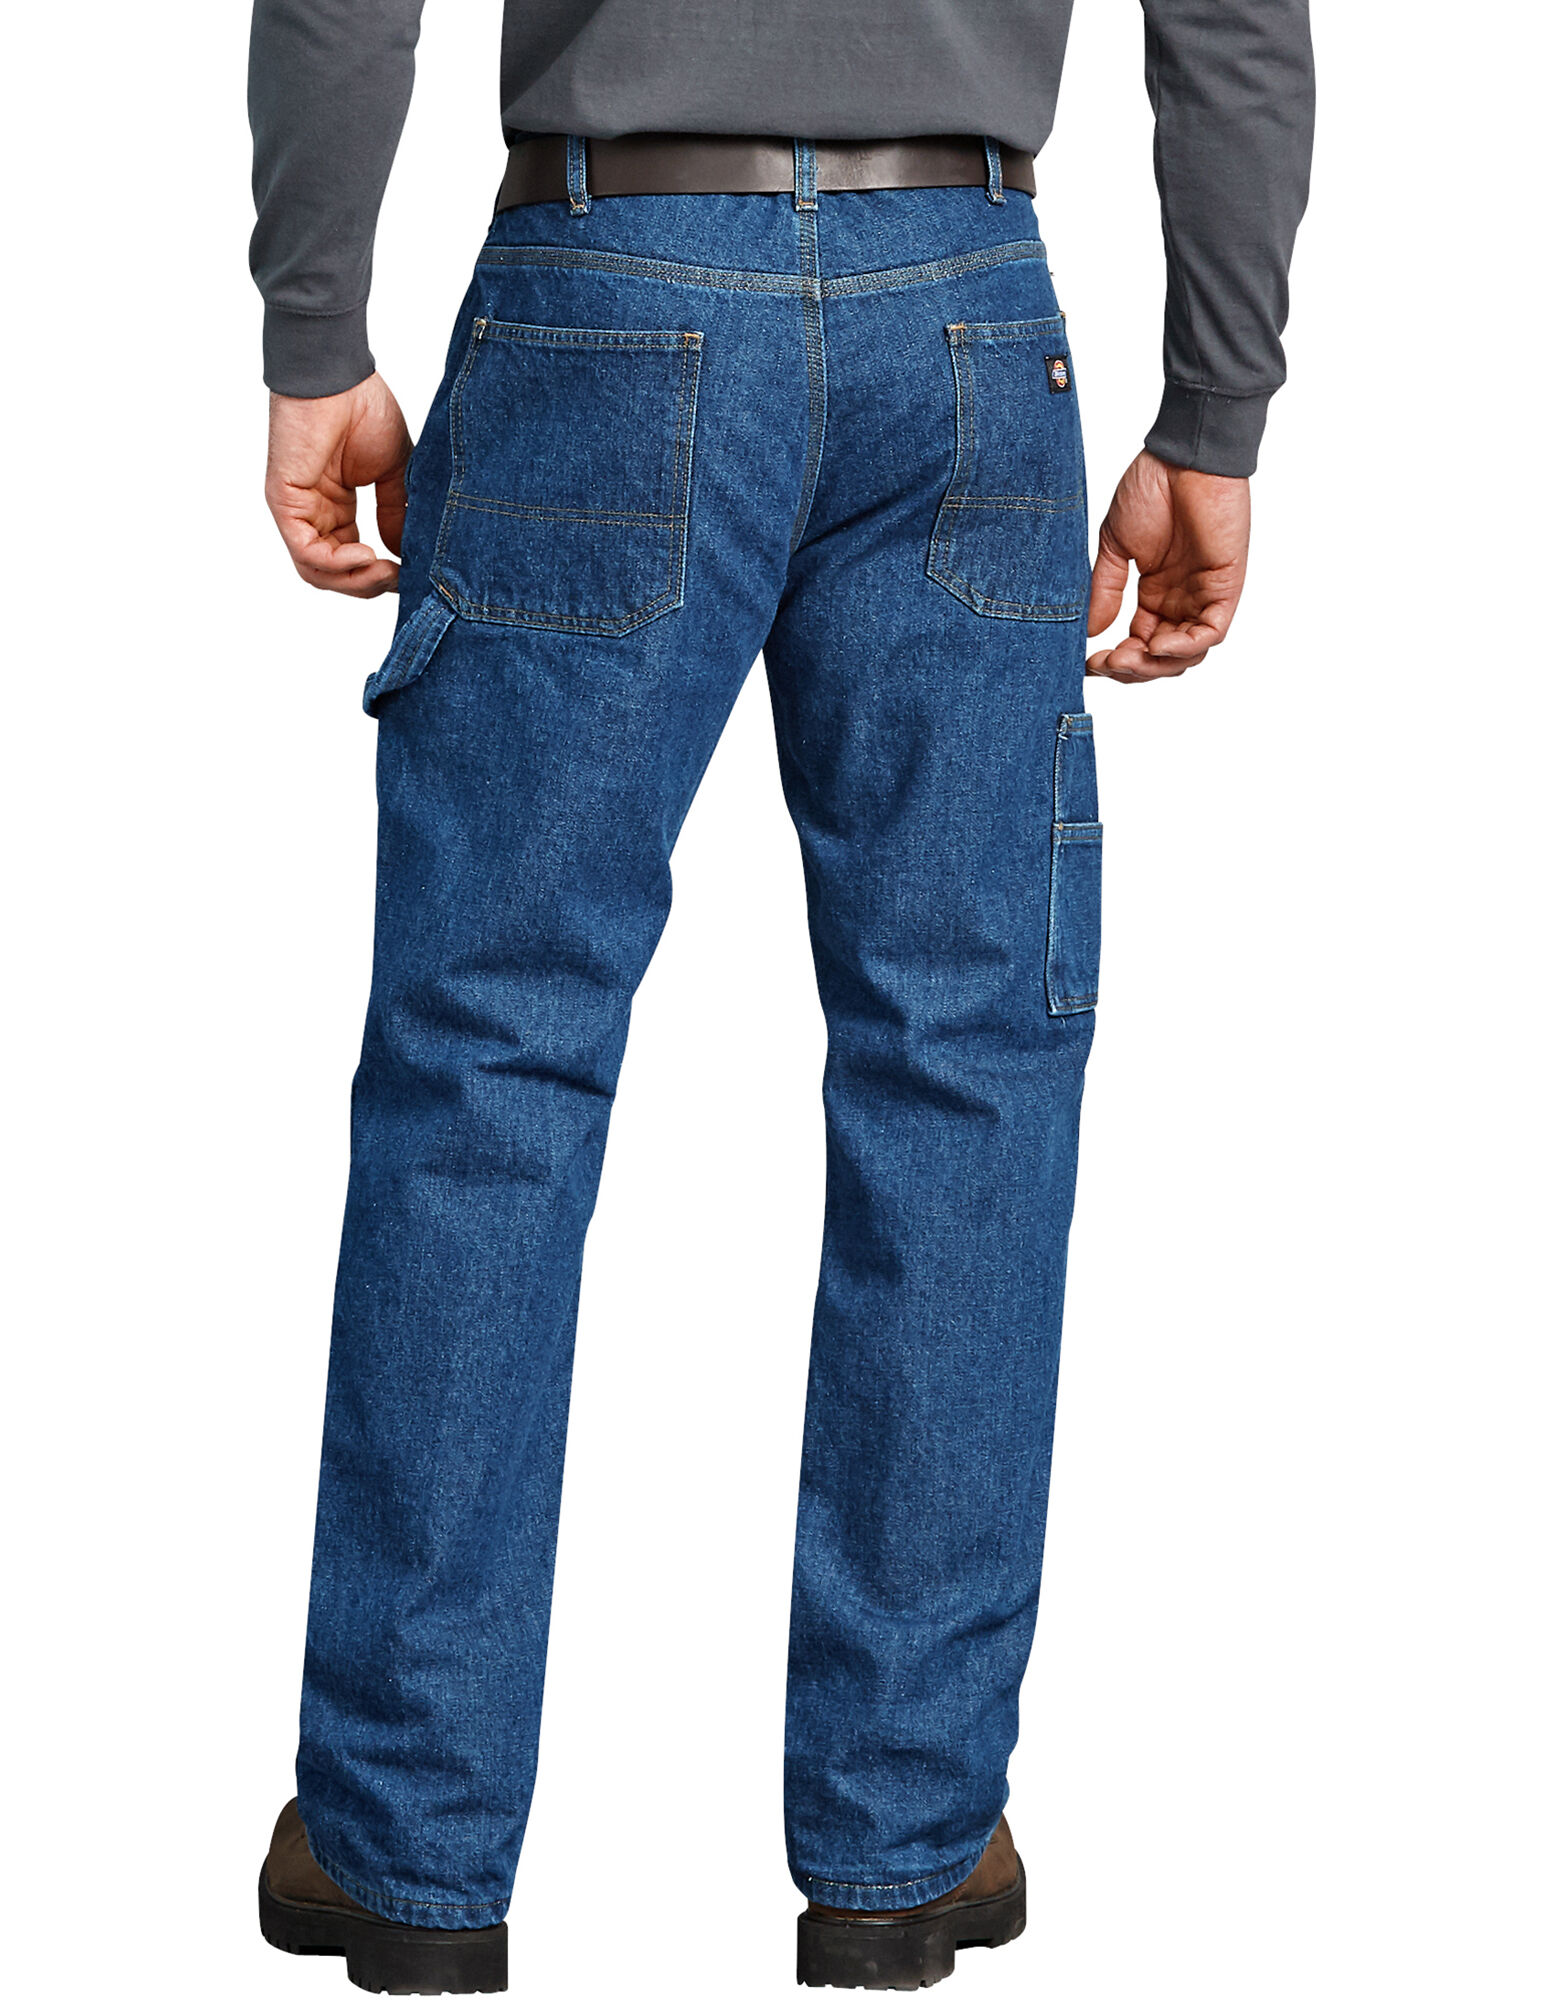 Relaxed Fit Straight Leg Flannel Lined Carpenter Denim Jeans | Dickies